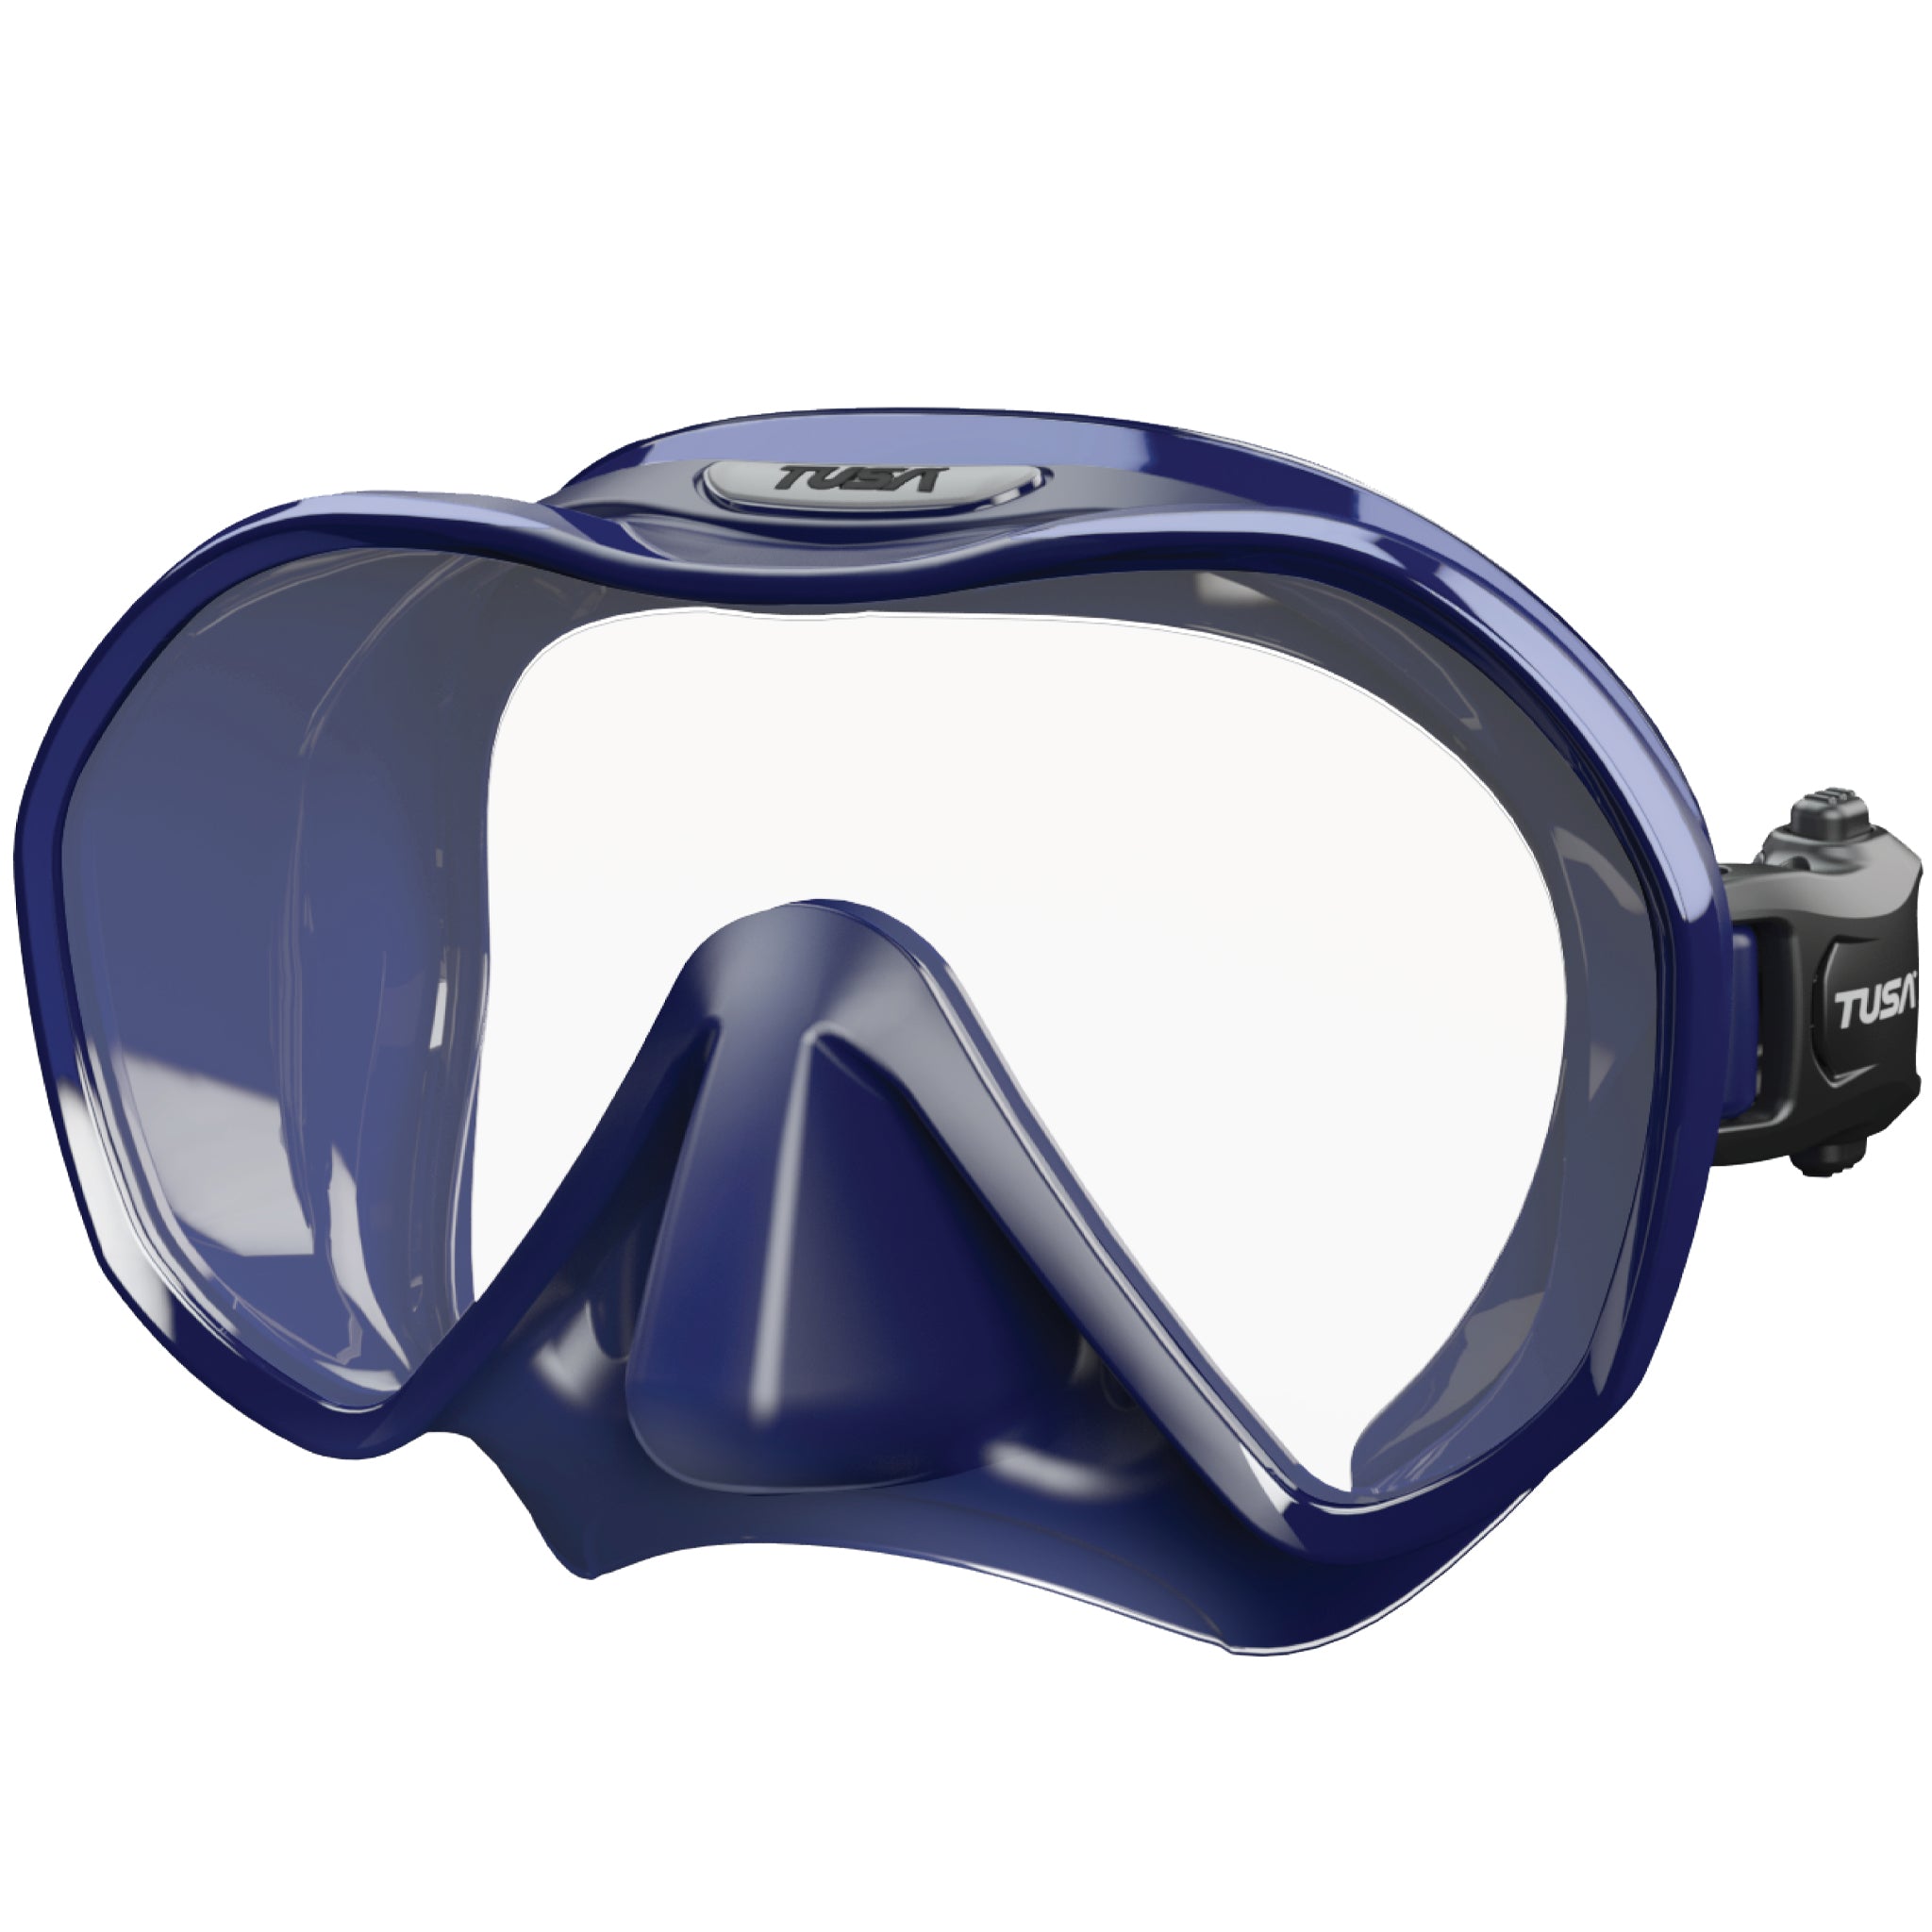 Tusa Zensee Mask for Scuba Diving and Snorkelling